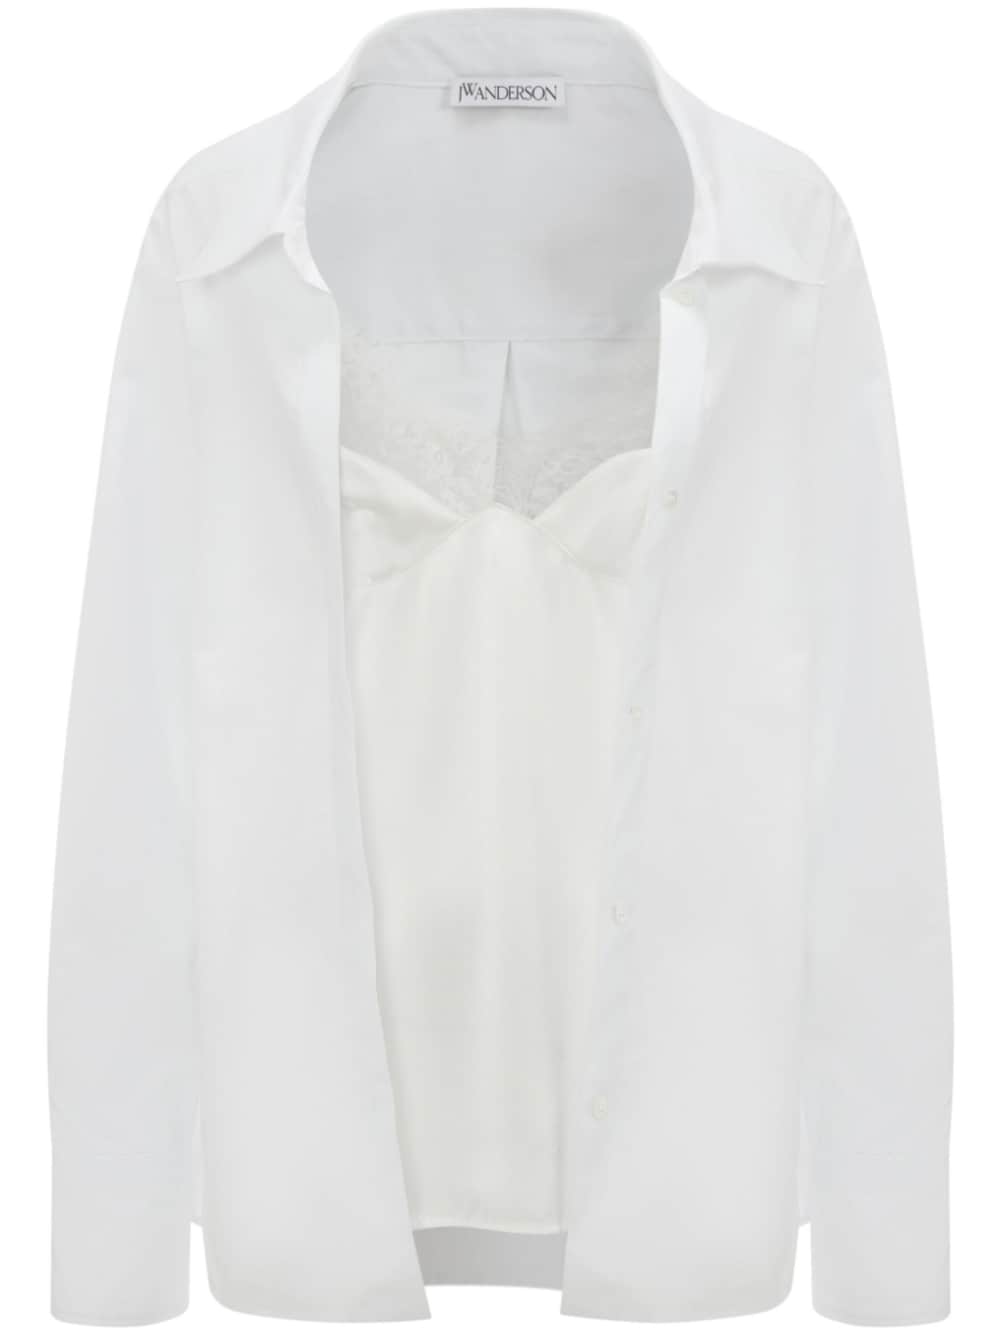 JW Anderson long-sleeved camisole shirt - White